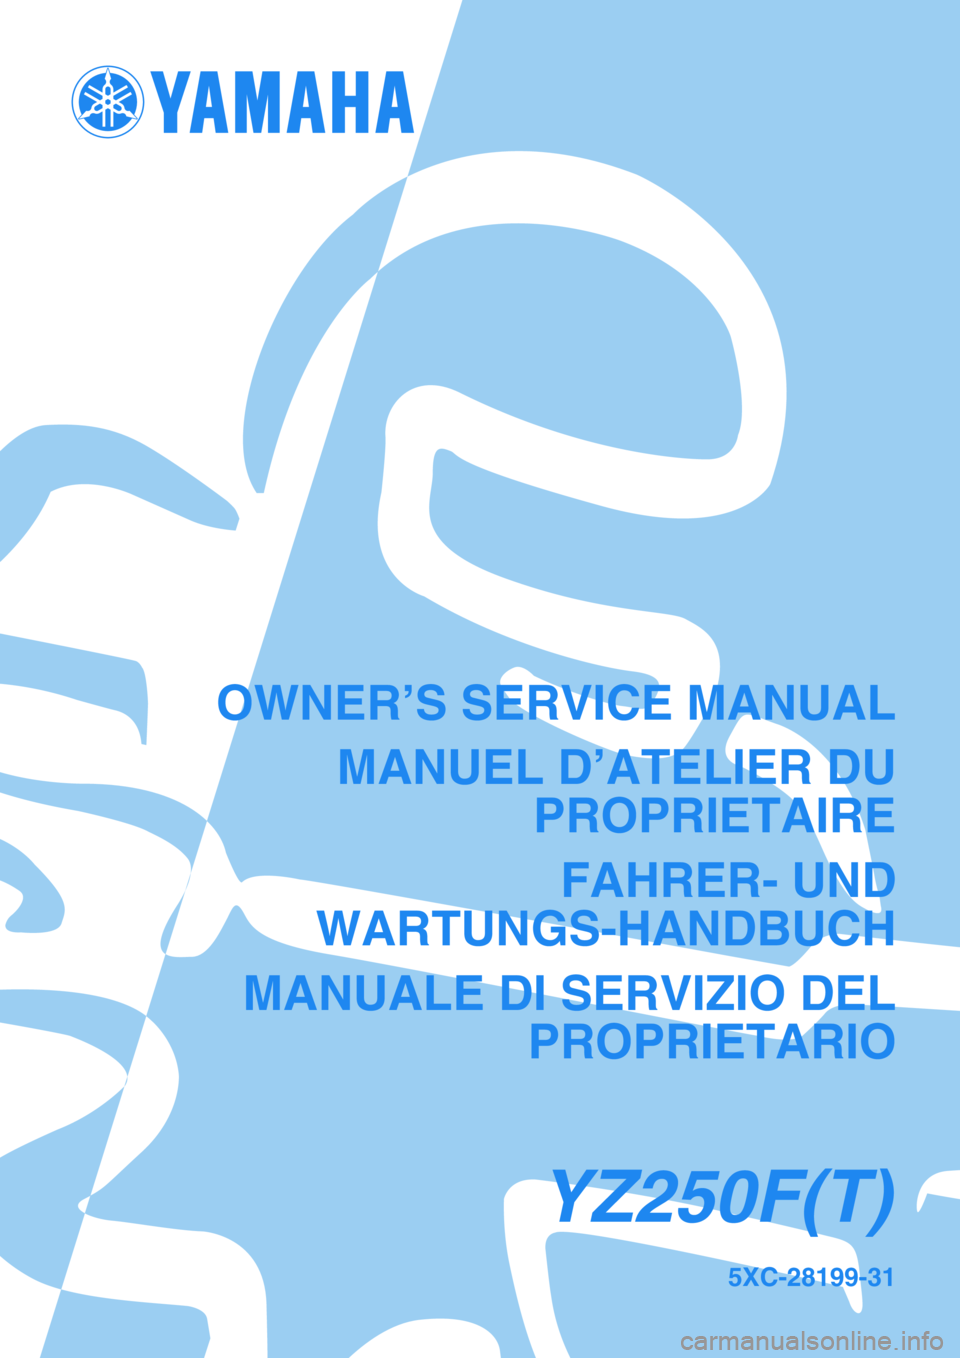 YAMAHA YZ250F 2005  Notices Demploi (in French) 5XC-28199-31
YZ250F(T)
OWNER’S SERVICE MANUAL
MANUEL D’ATELIER DU
PROPRIETAIRE
FAHRER- UND
WARTUNGS-HANDBUCH
MANUALE DI SERVIZIO DEL
PROPRIETARIO 